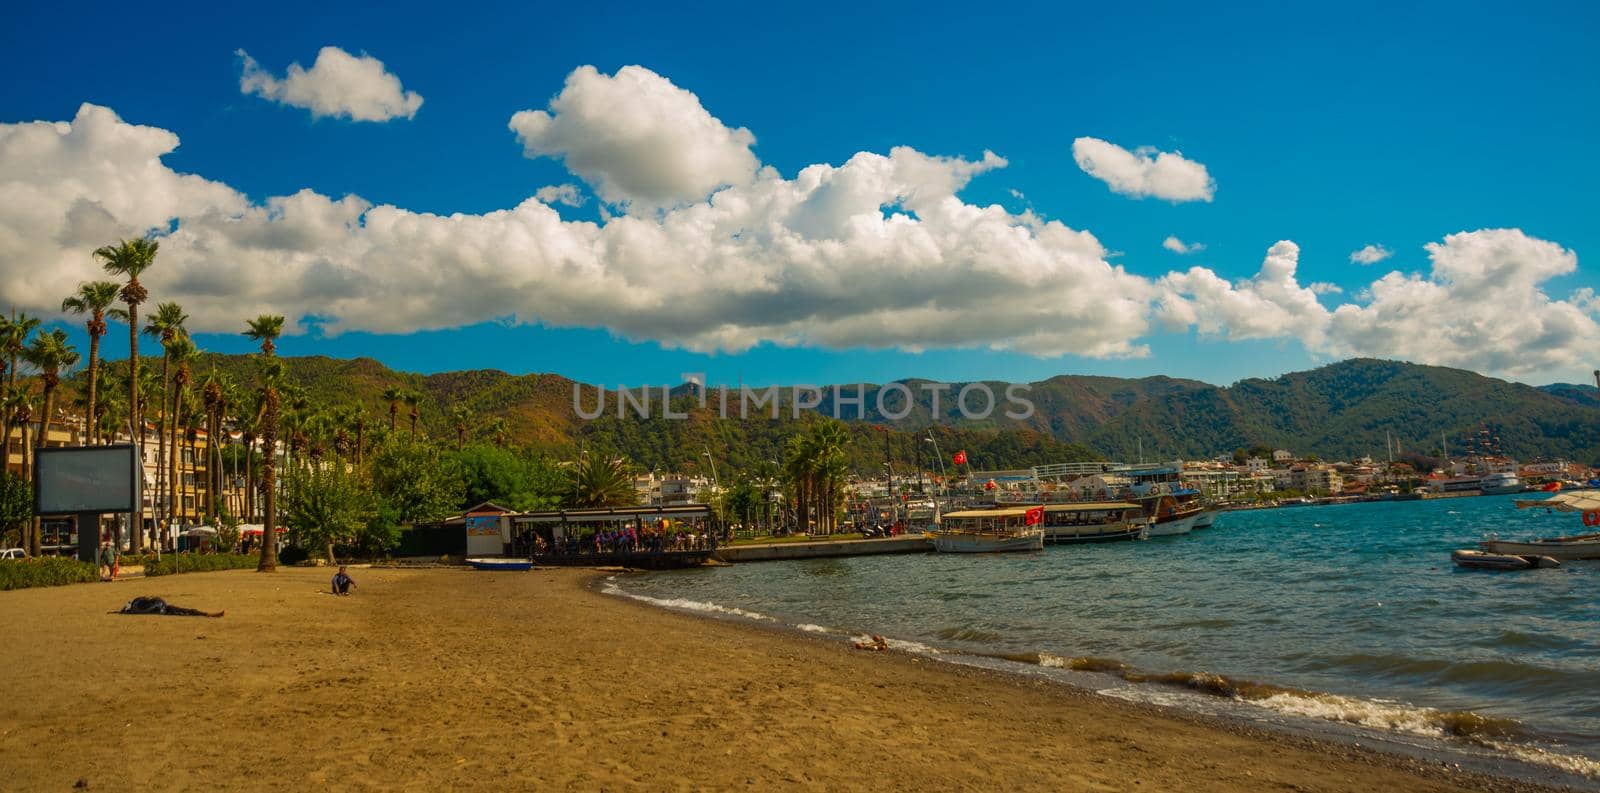 MARMARIS, TURKEY: Beautiful landscape with views of the beach, the Mediterranean sea and the mountains on a sunny day. by Artamonova